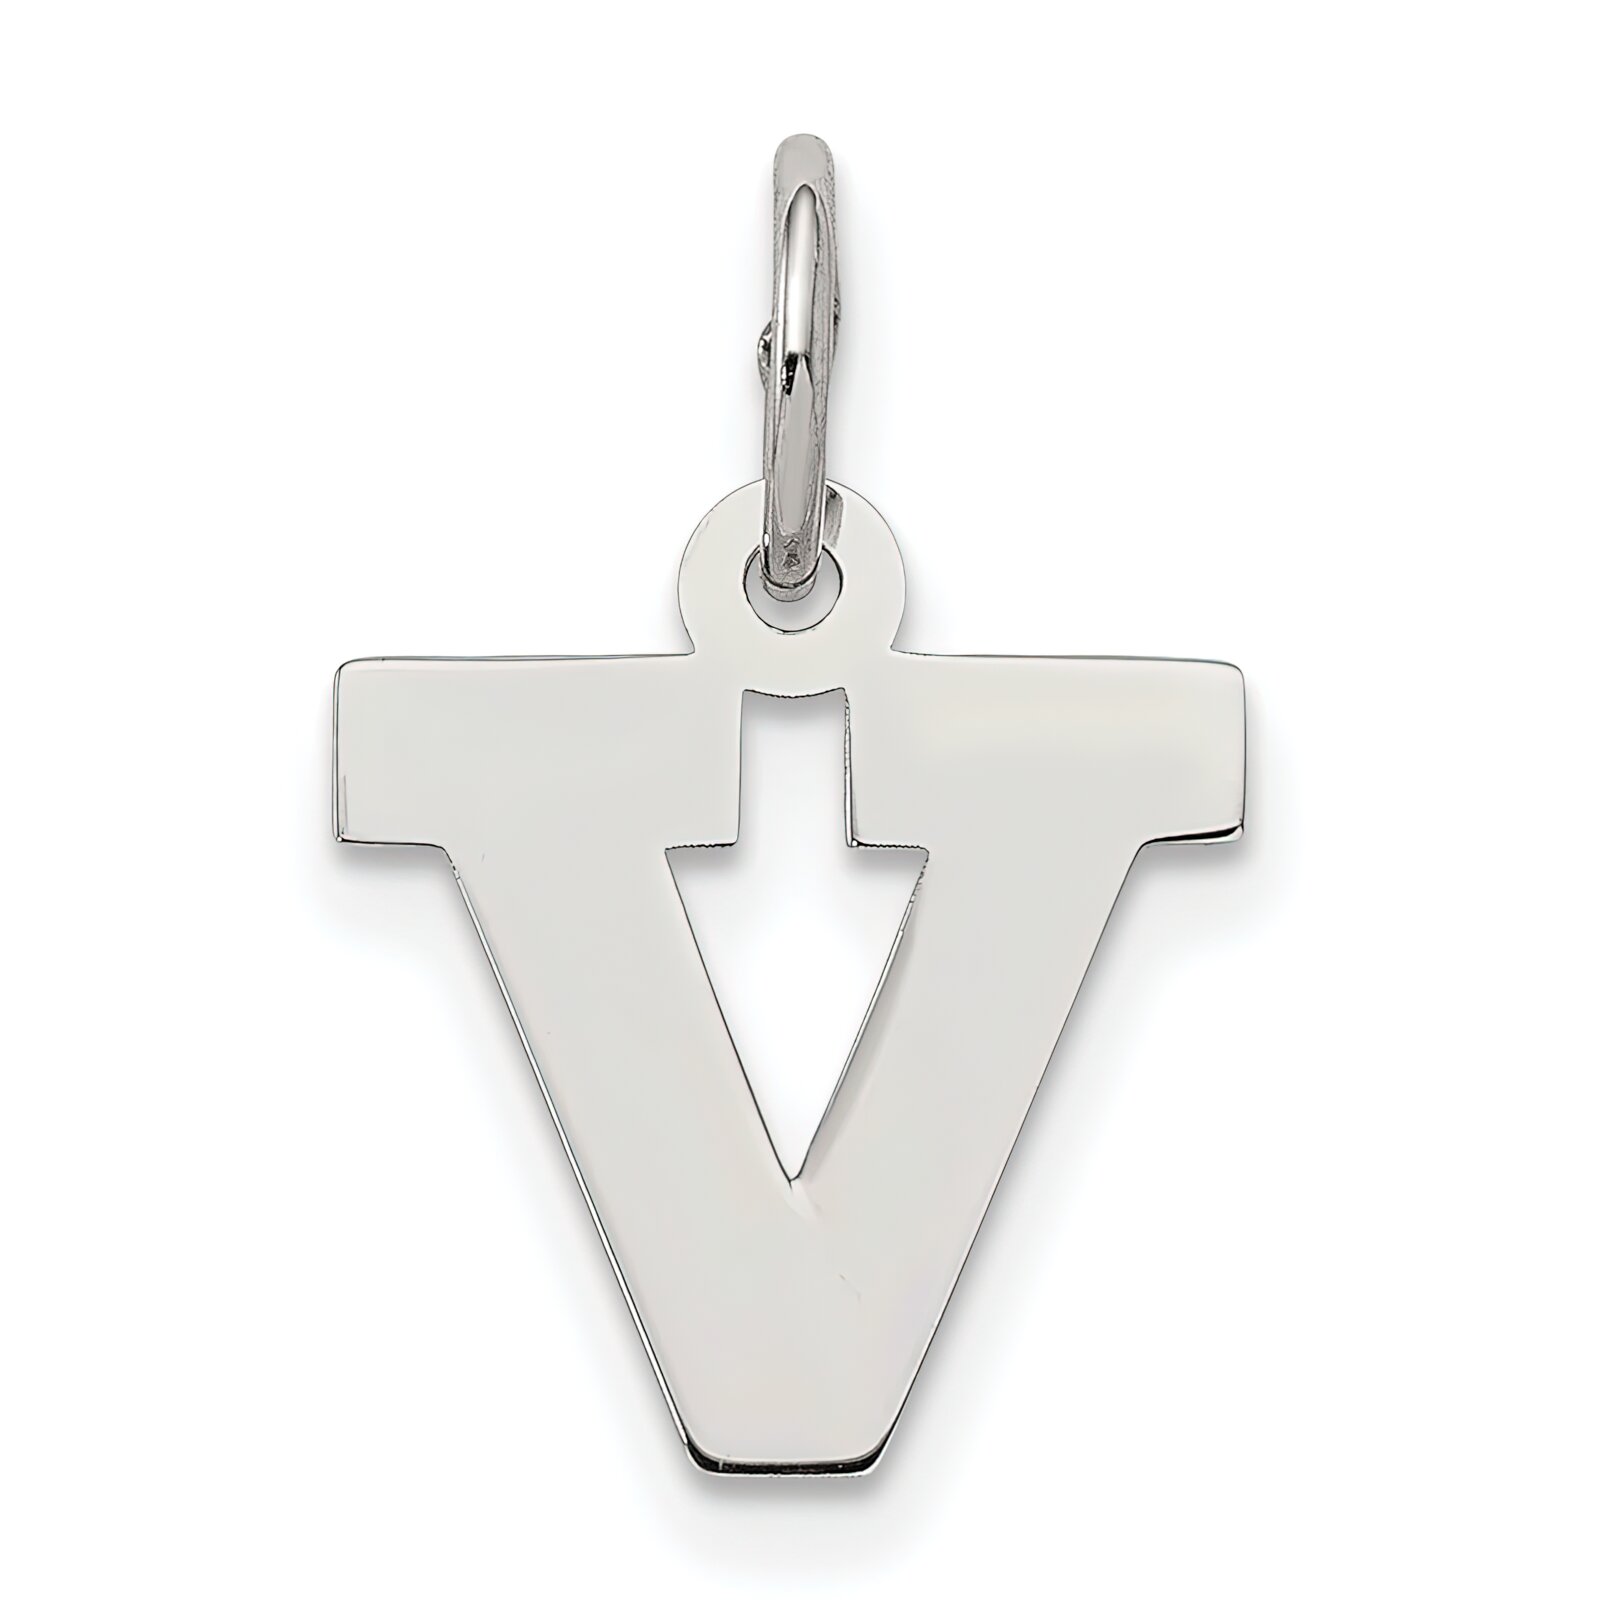 Findingking Sterling Silver Small Block Initial Letter V Charm